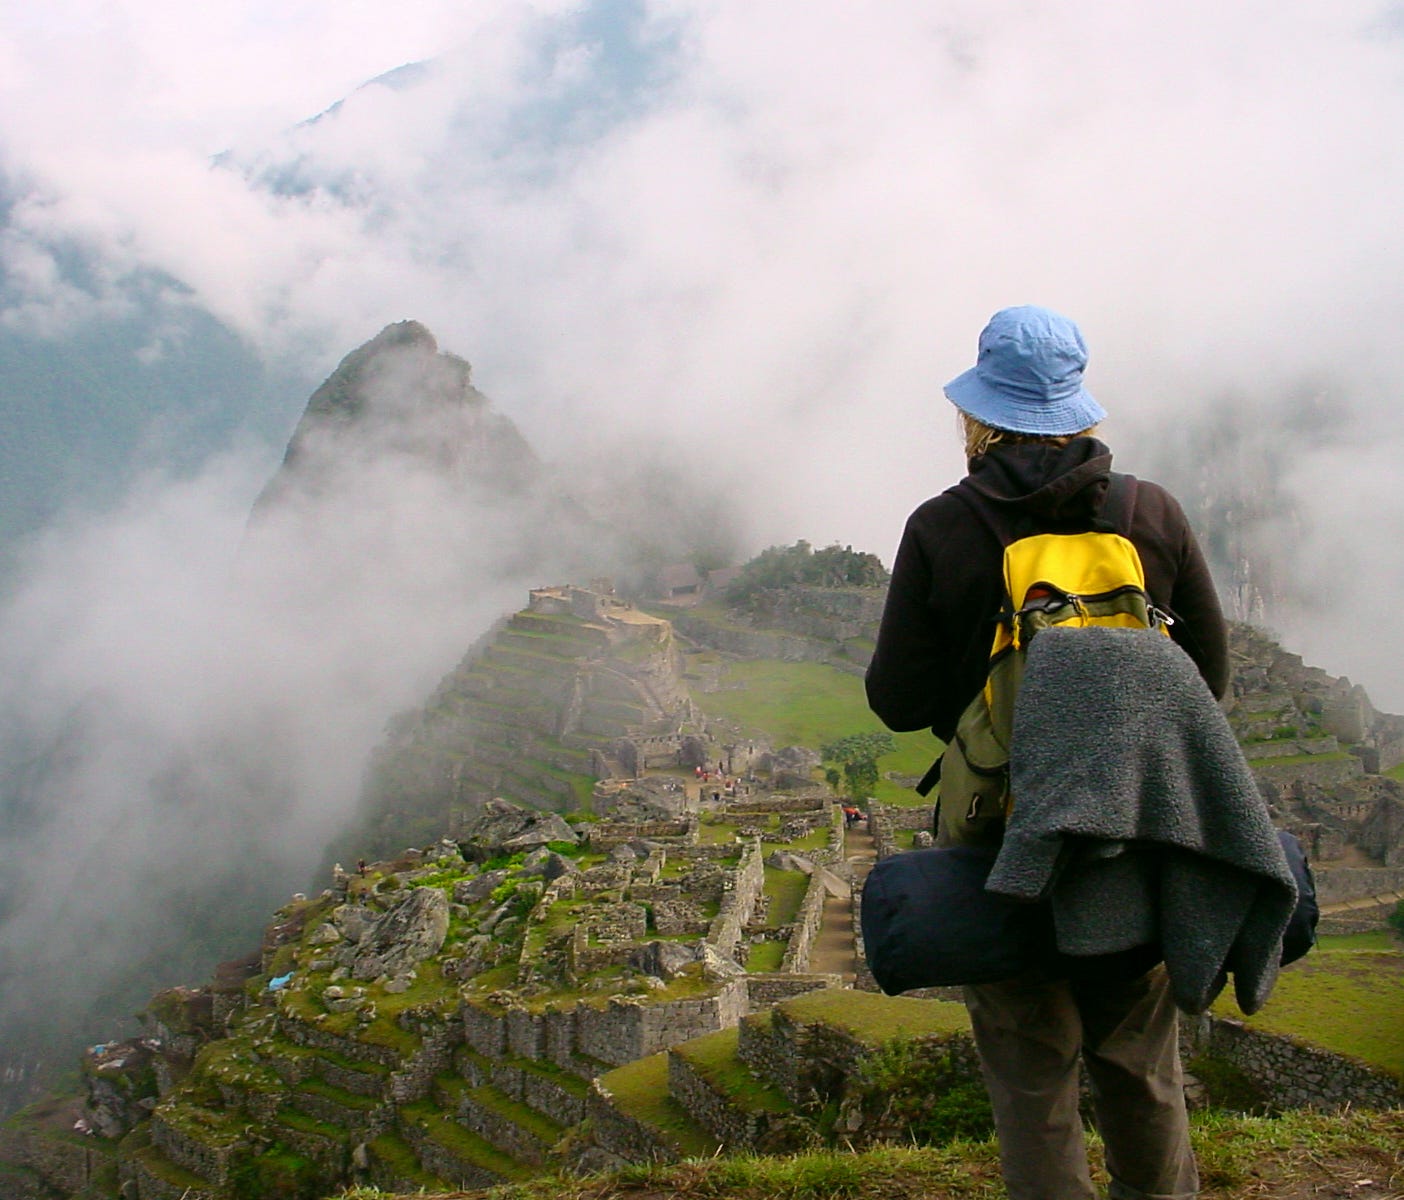 While some Millennial travelers are choosing popular party destinations, others look for physically challenging trips like hiking the Inca Trail.